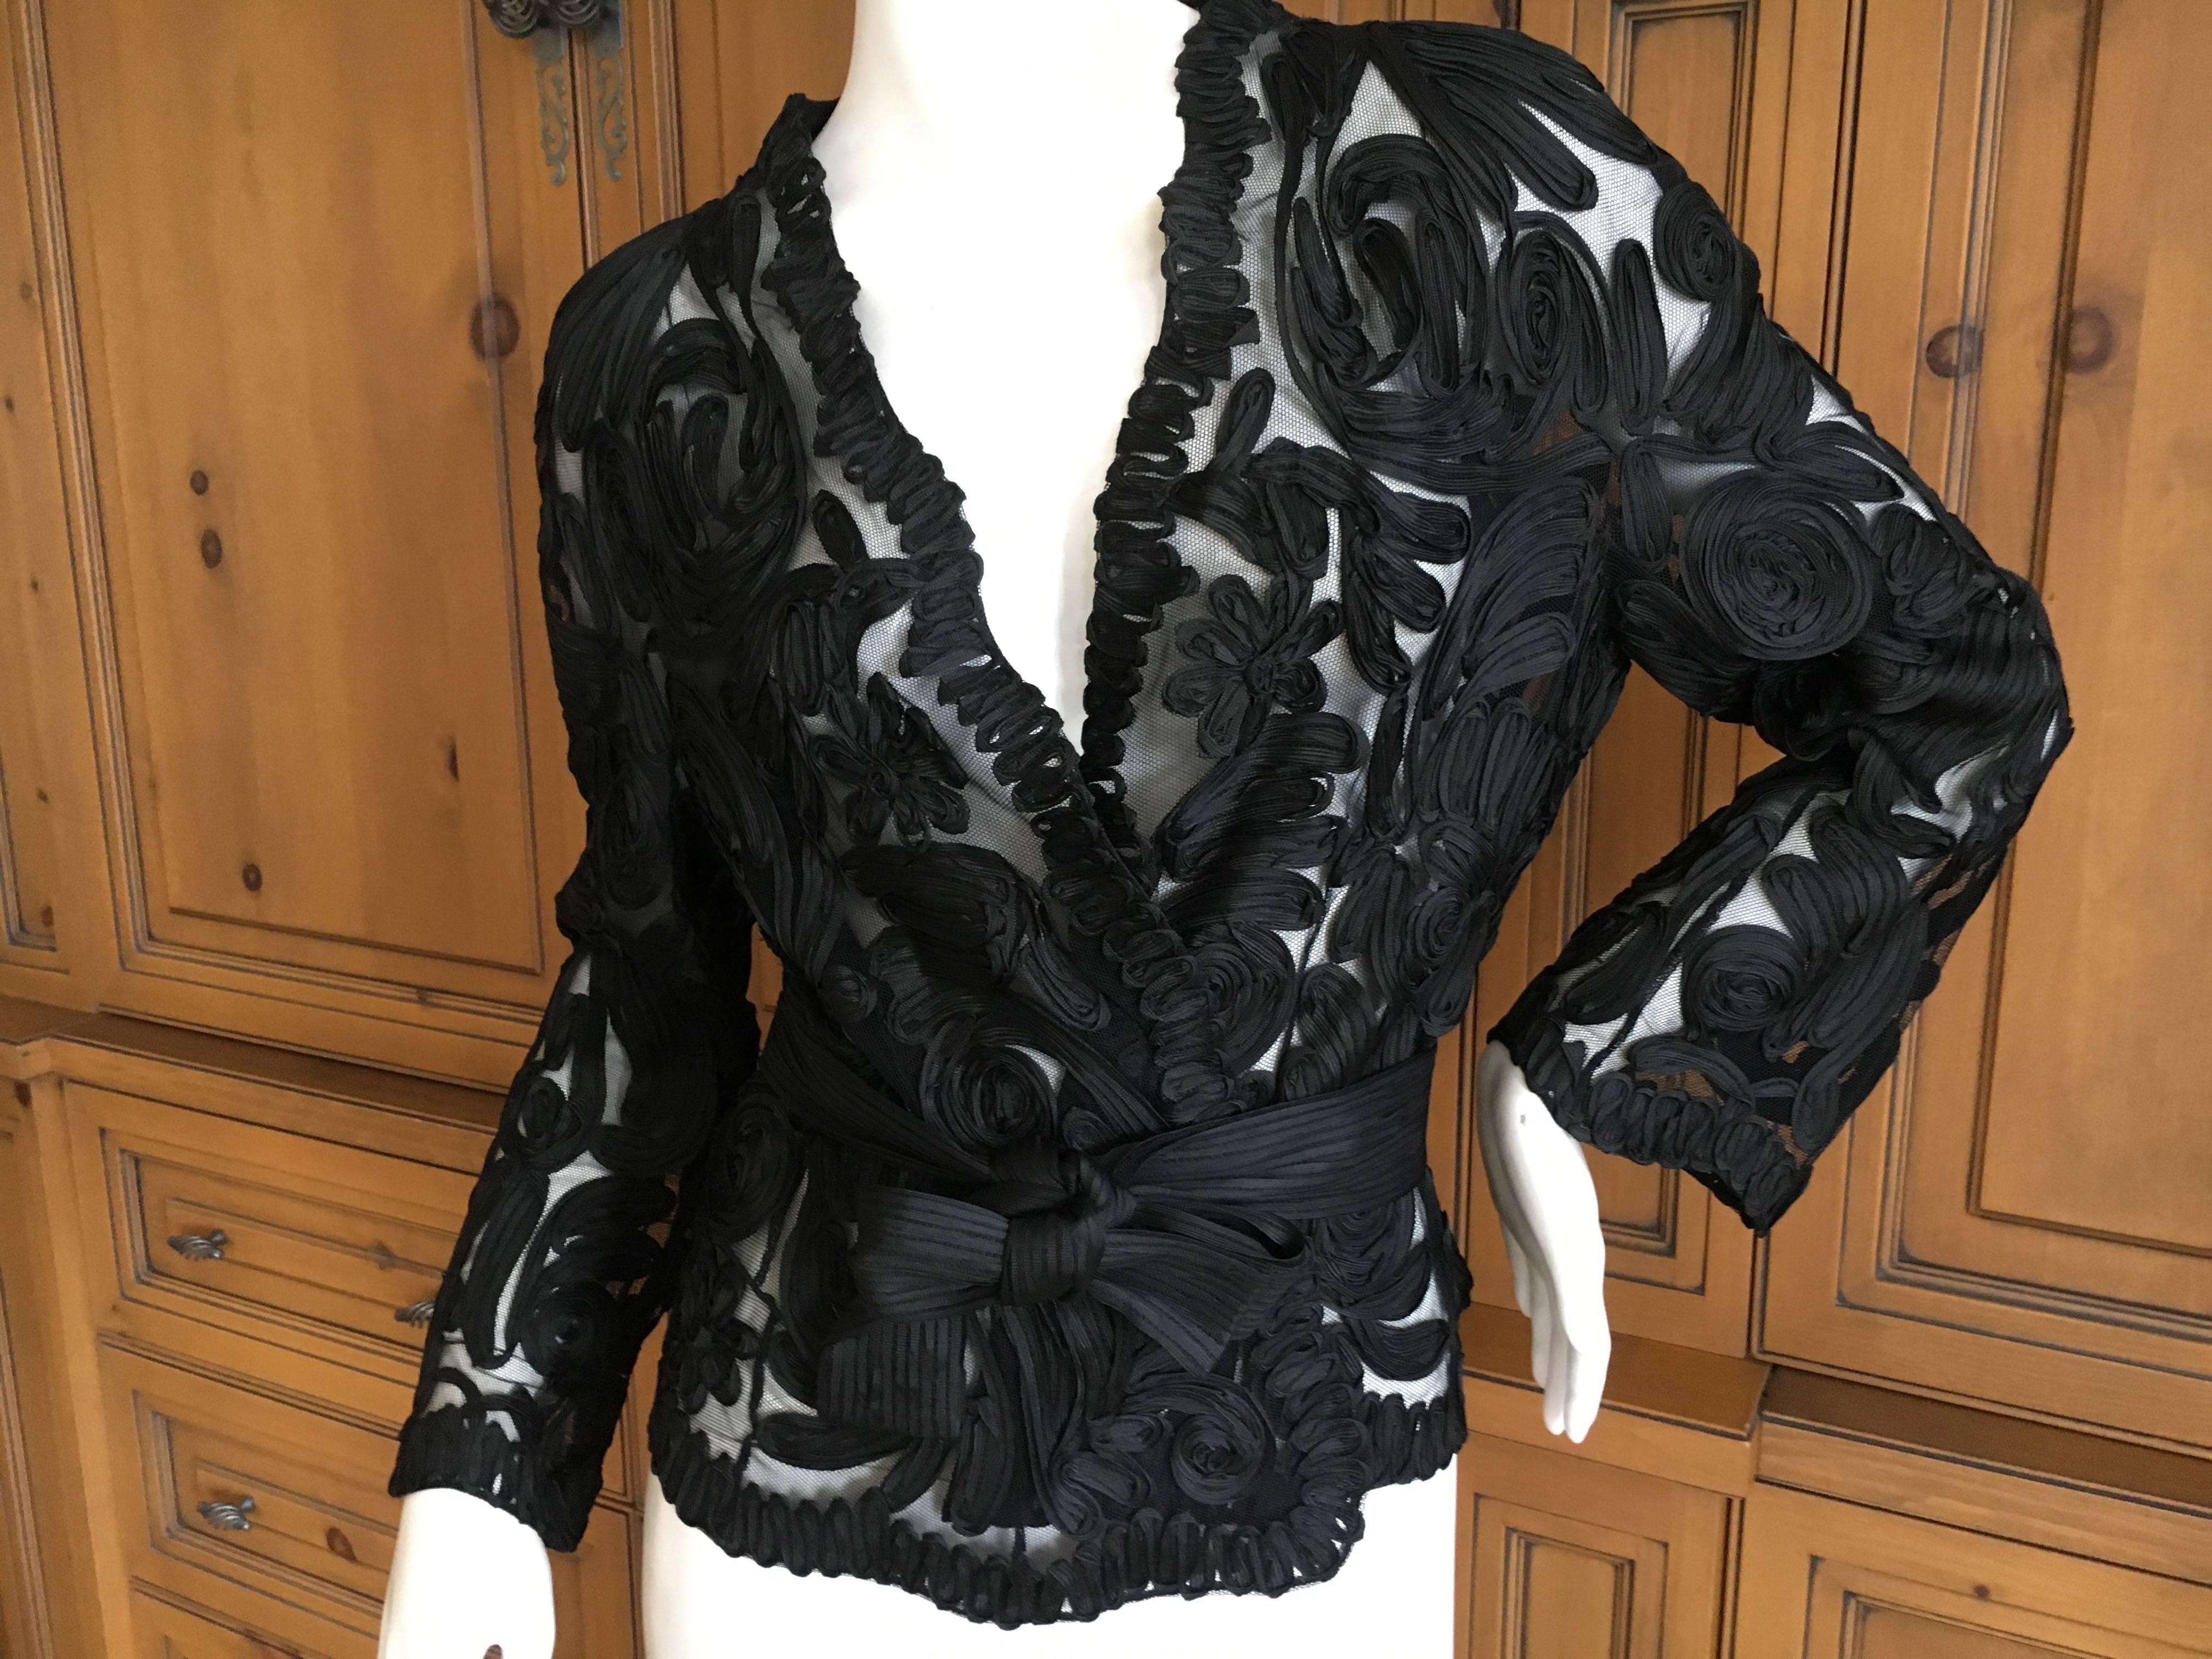 Christian Dior by John Galliano Sheer Black Jacket with Soutache Details.
New with tags, from the Urban Glamour Collection.
Size 42
Bust 42